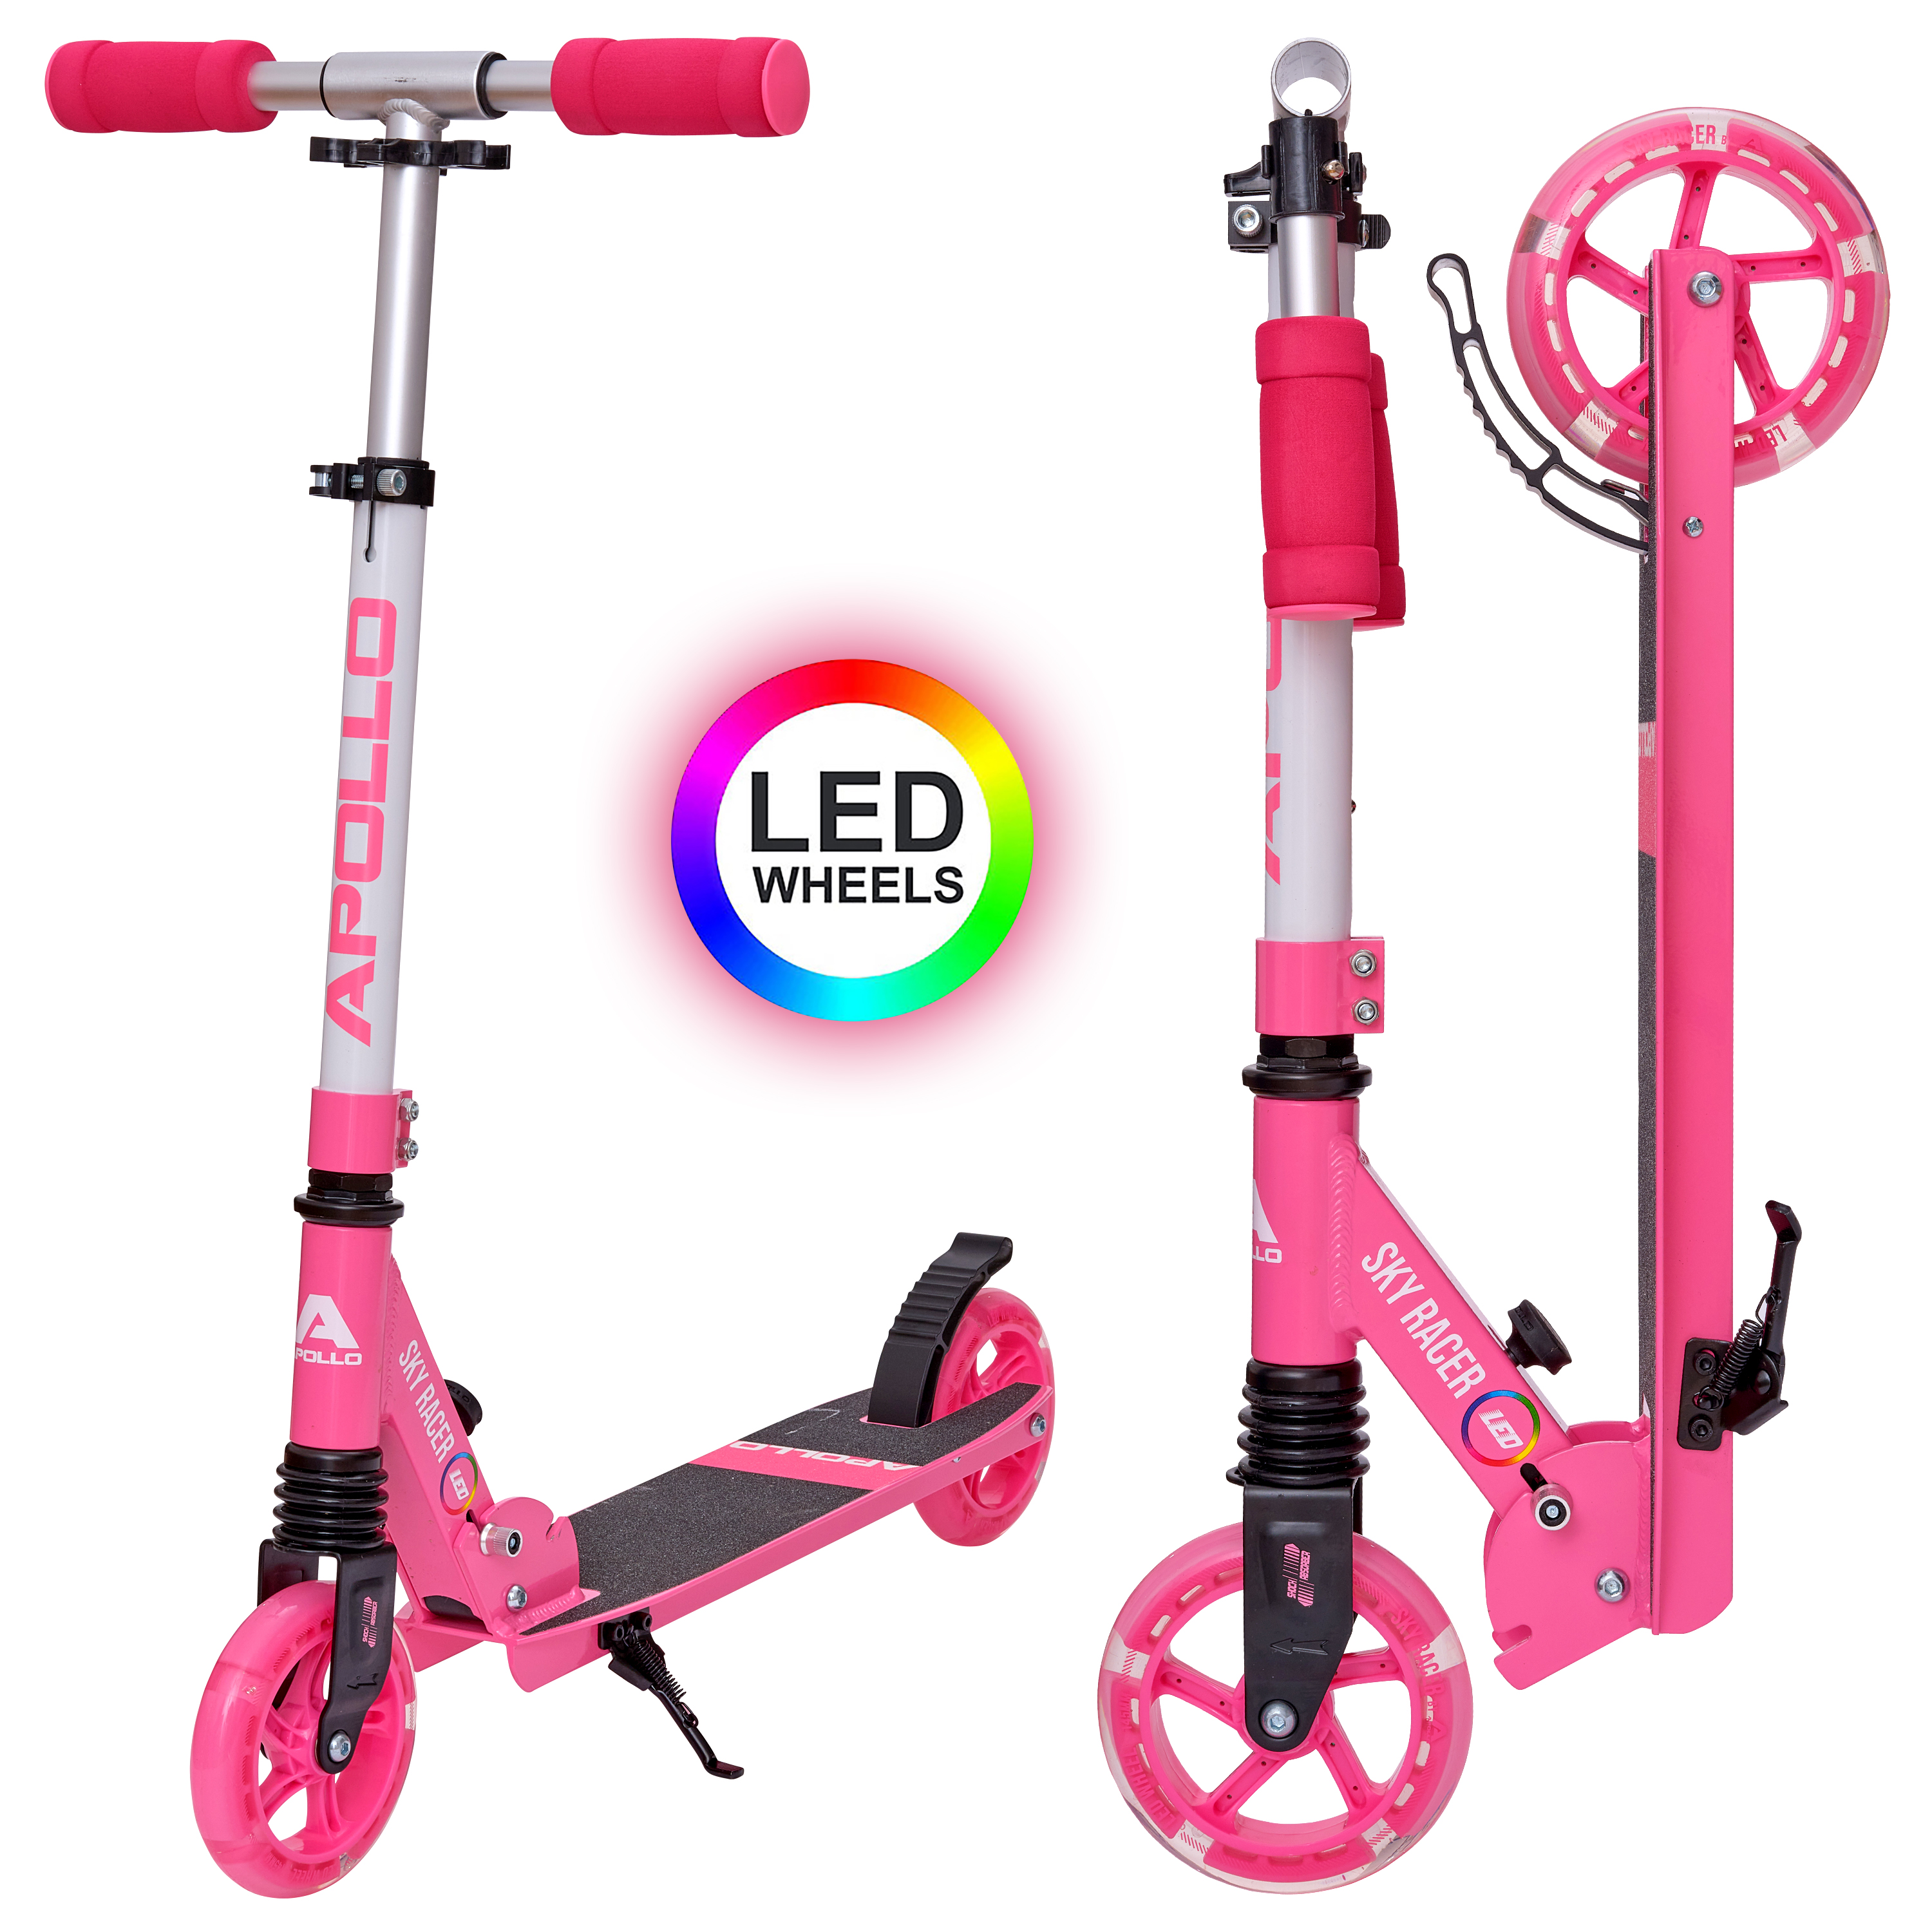 City Scooter - Skyracer LED - Pink -145mm Wheels - von Apollo